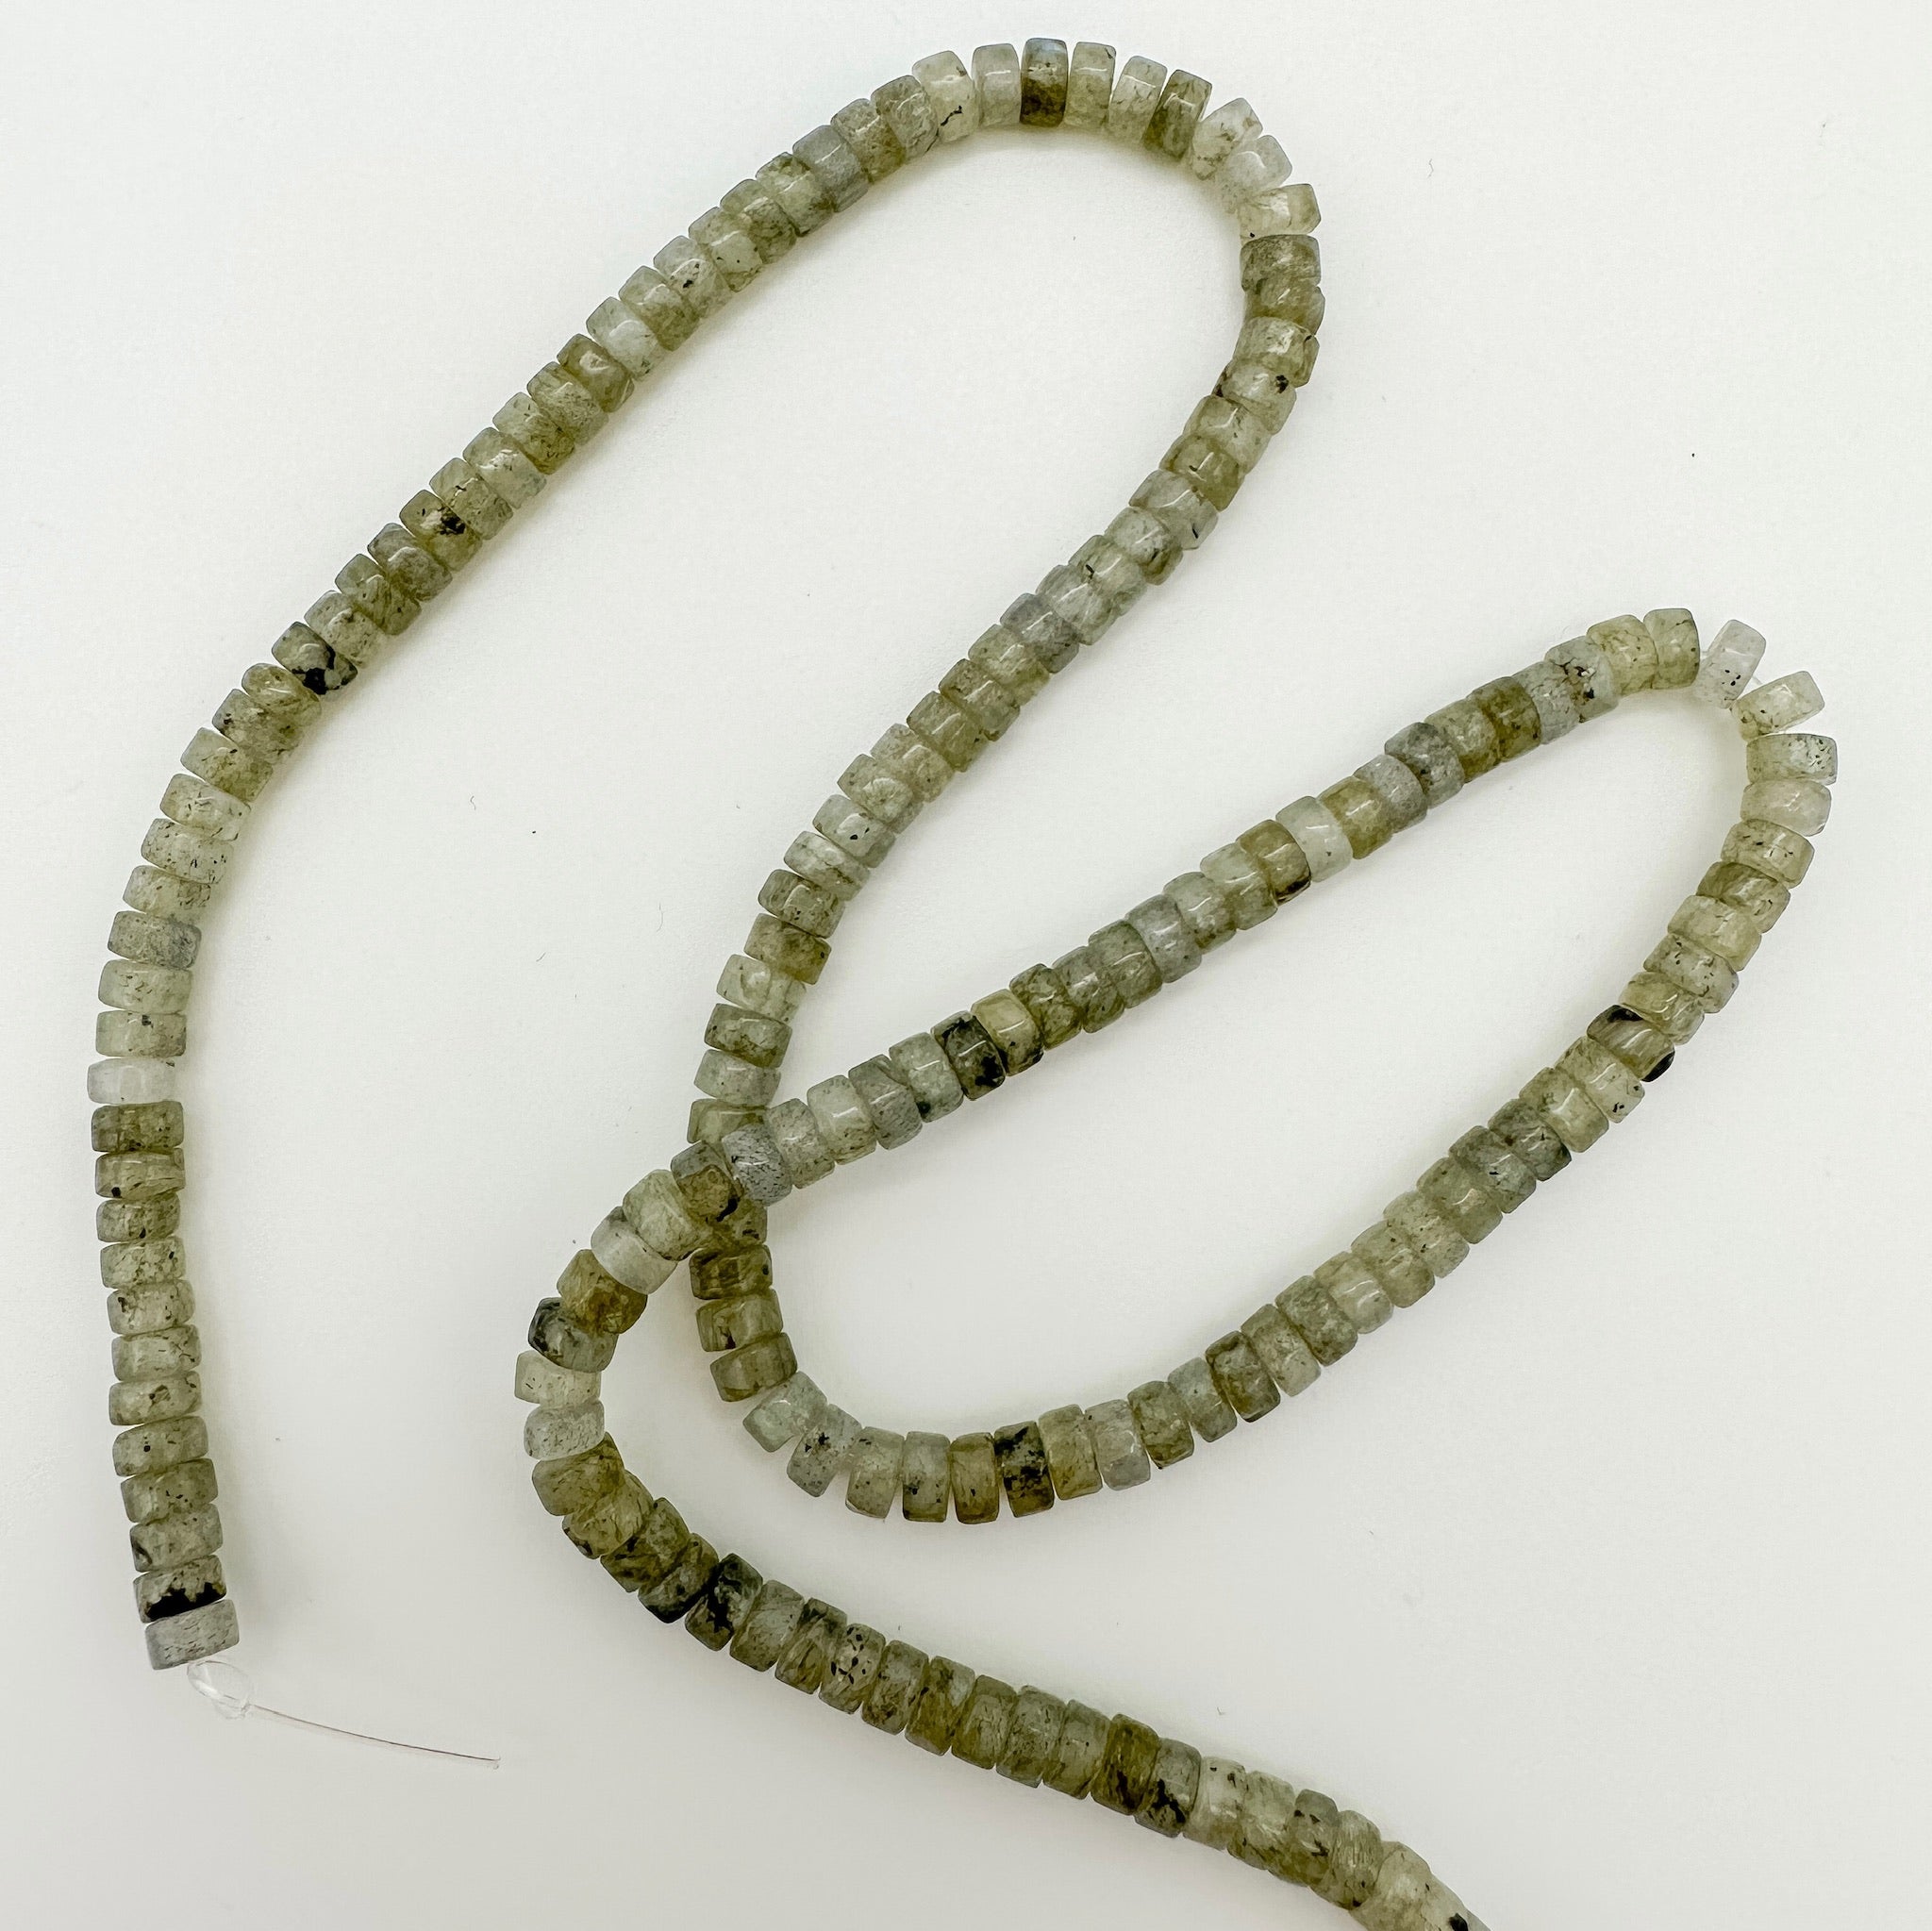  Natural Labradorite Beads Strands, Heishi Beads beads for jewelry making, beaded bracelets, jewelry supplies